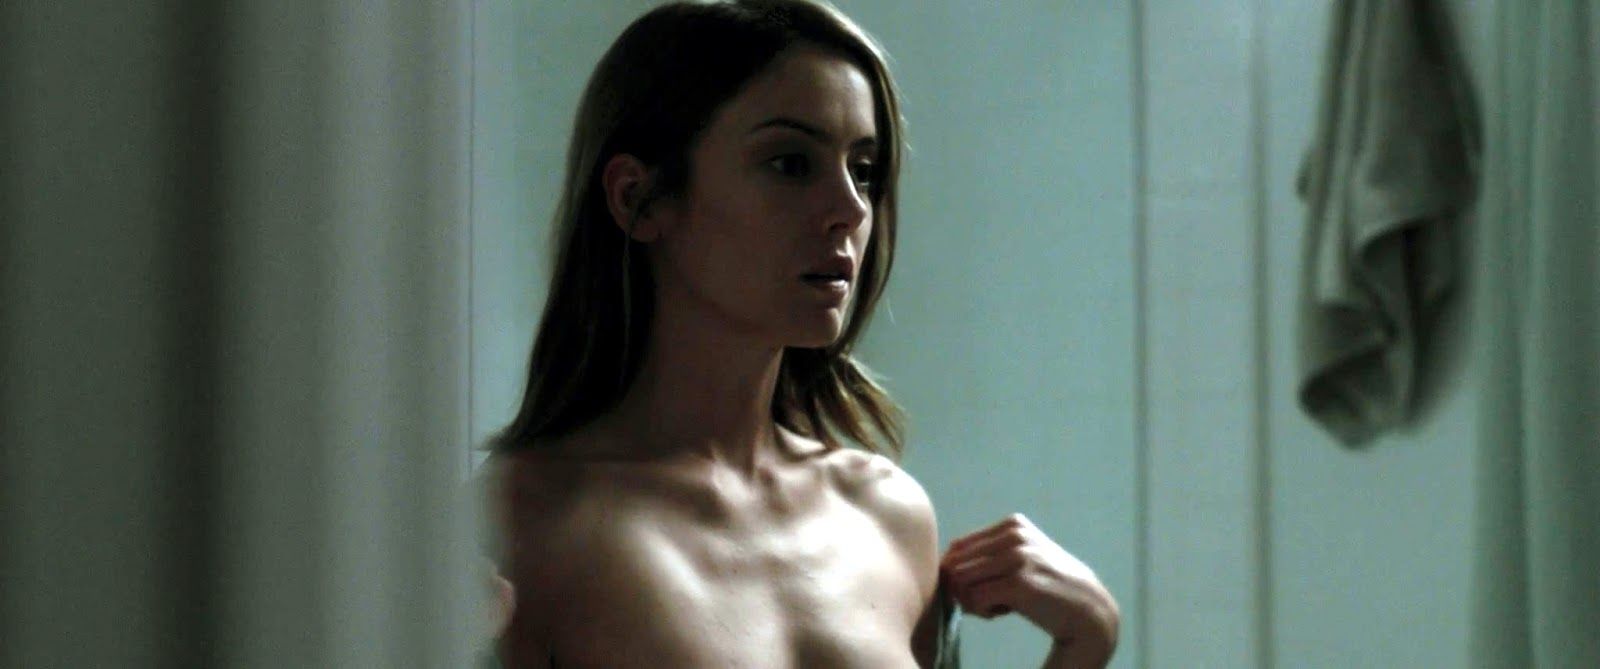 Jessica stroup nude images